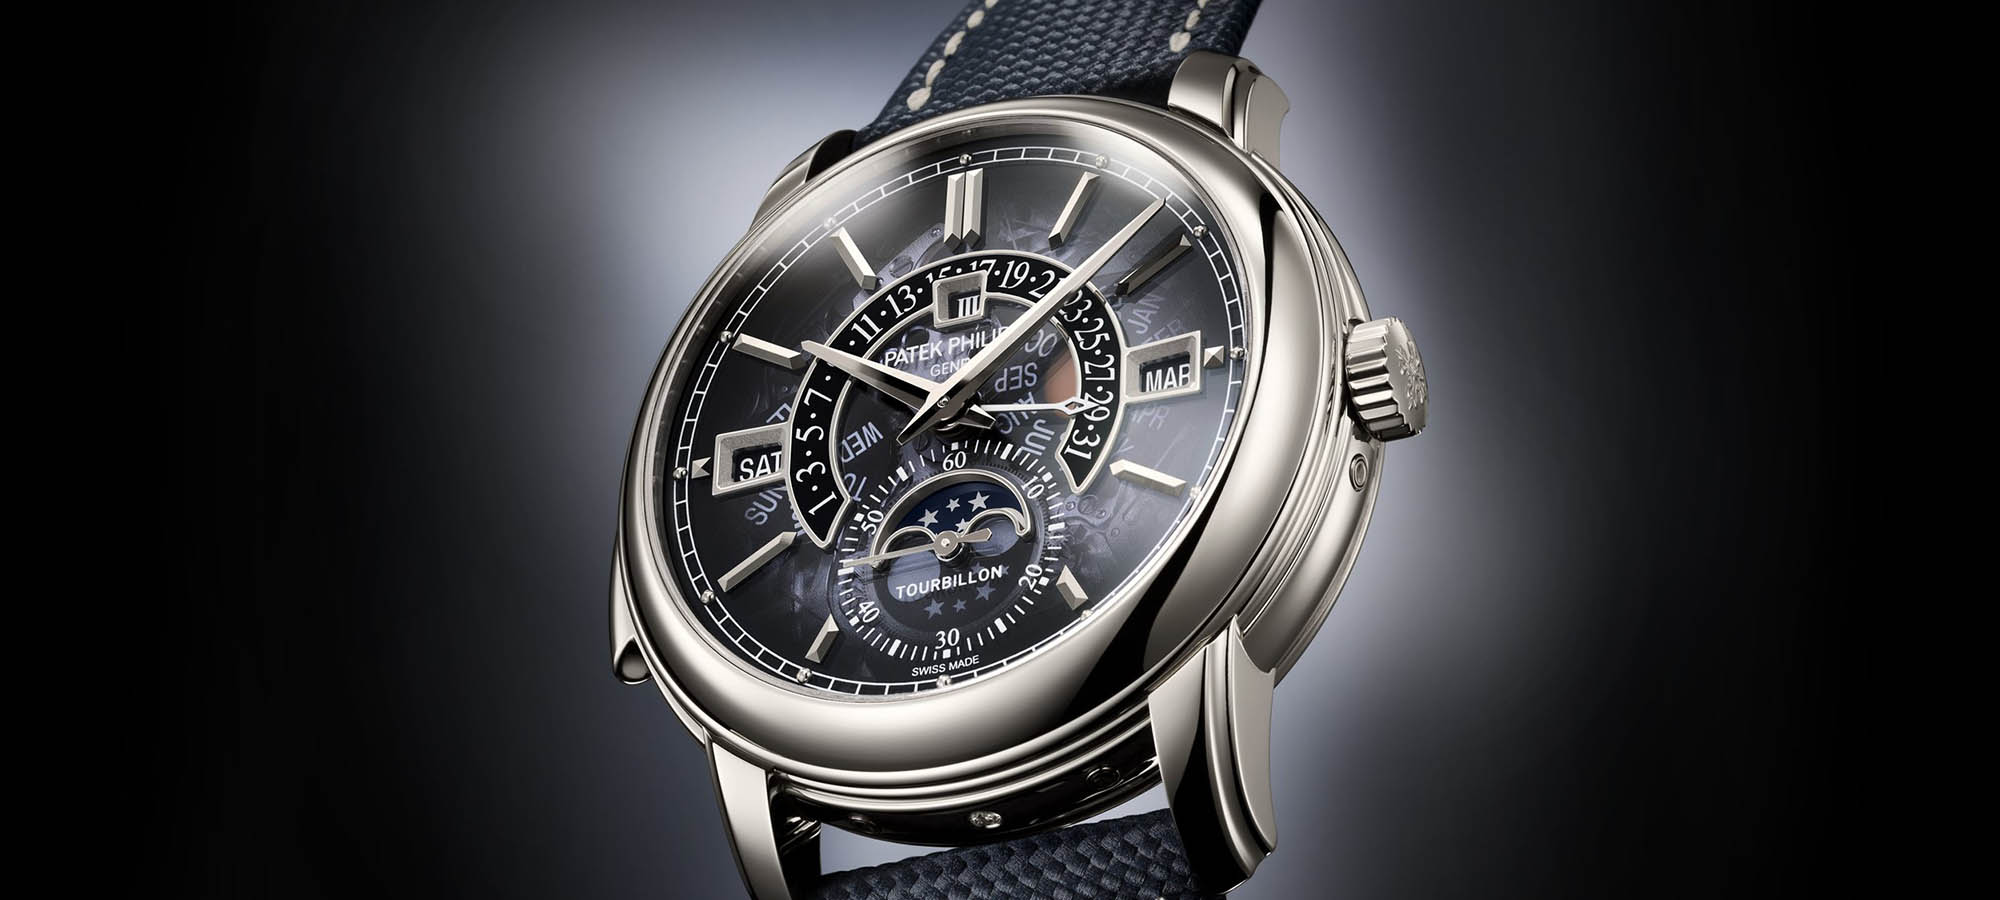 Watch Of The Week: The Patek Philippe Grand Complication Ref. 5316/50P